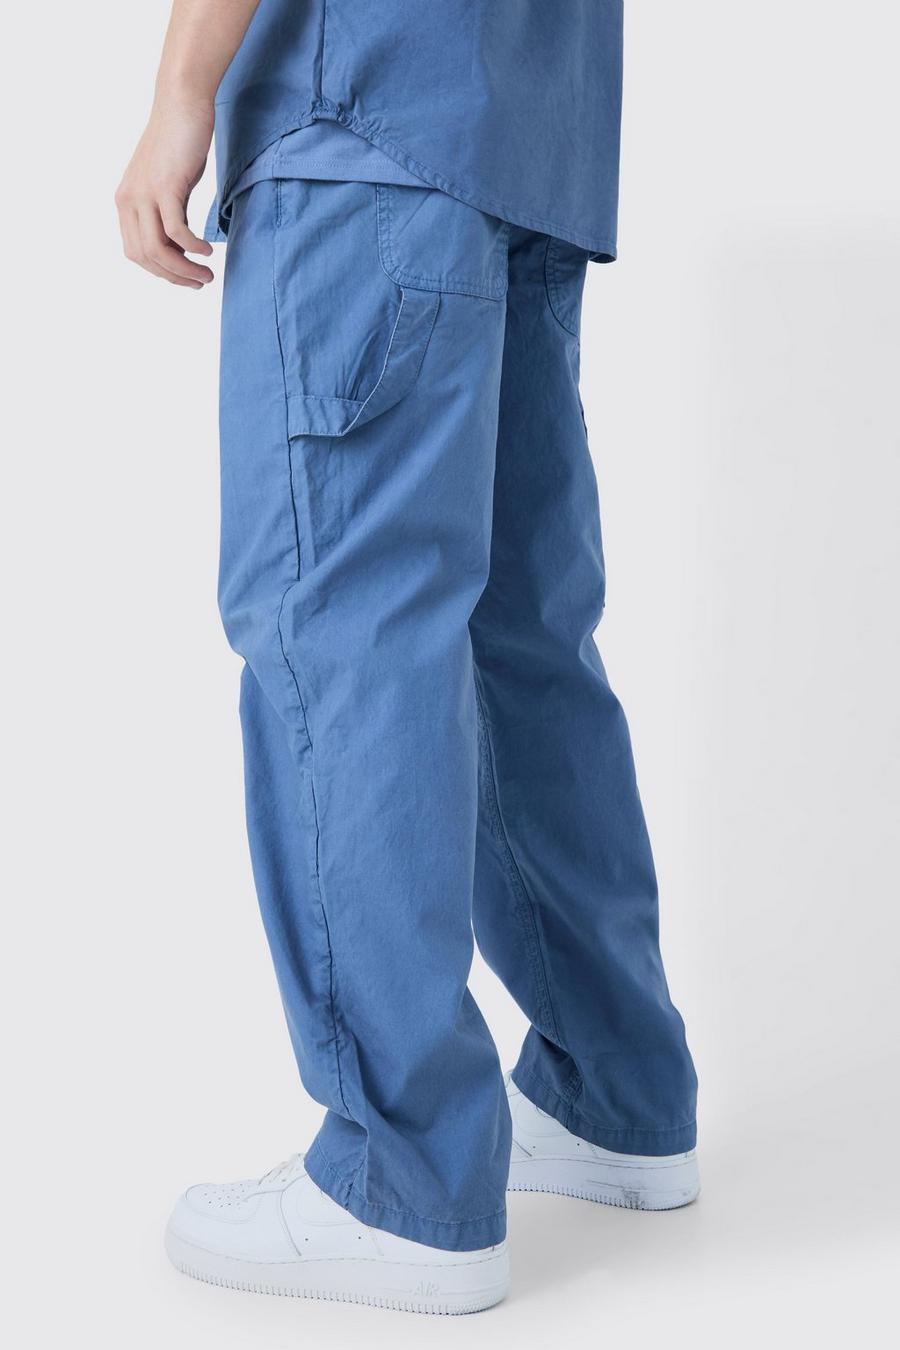 Slate blue Fixed Waist Washed Relaxed Fit Carpenter Trouser